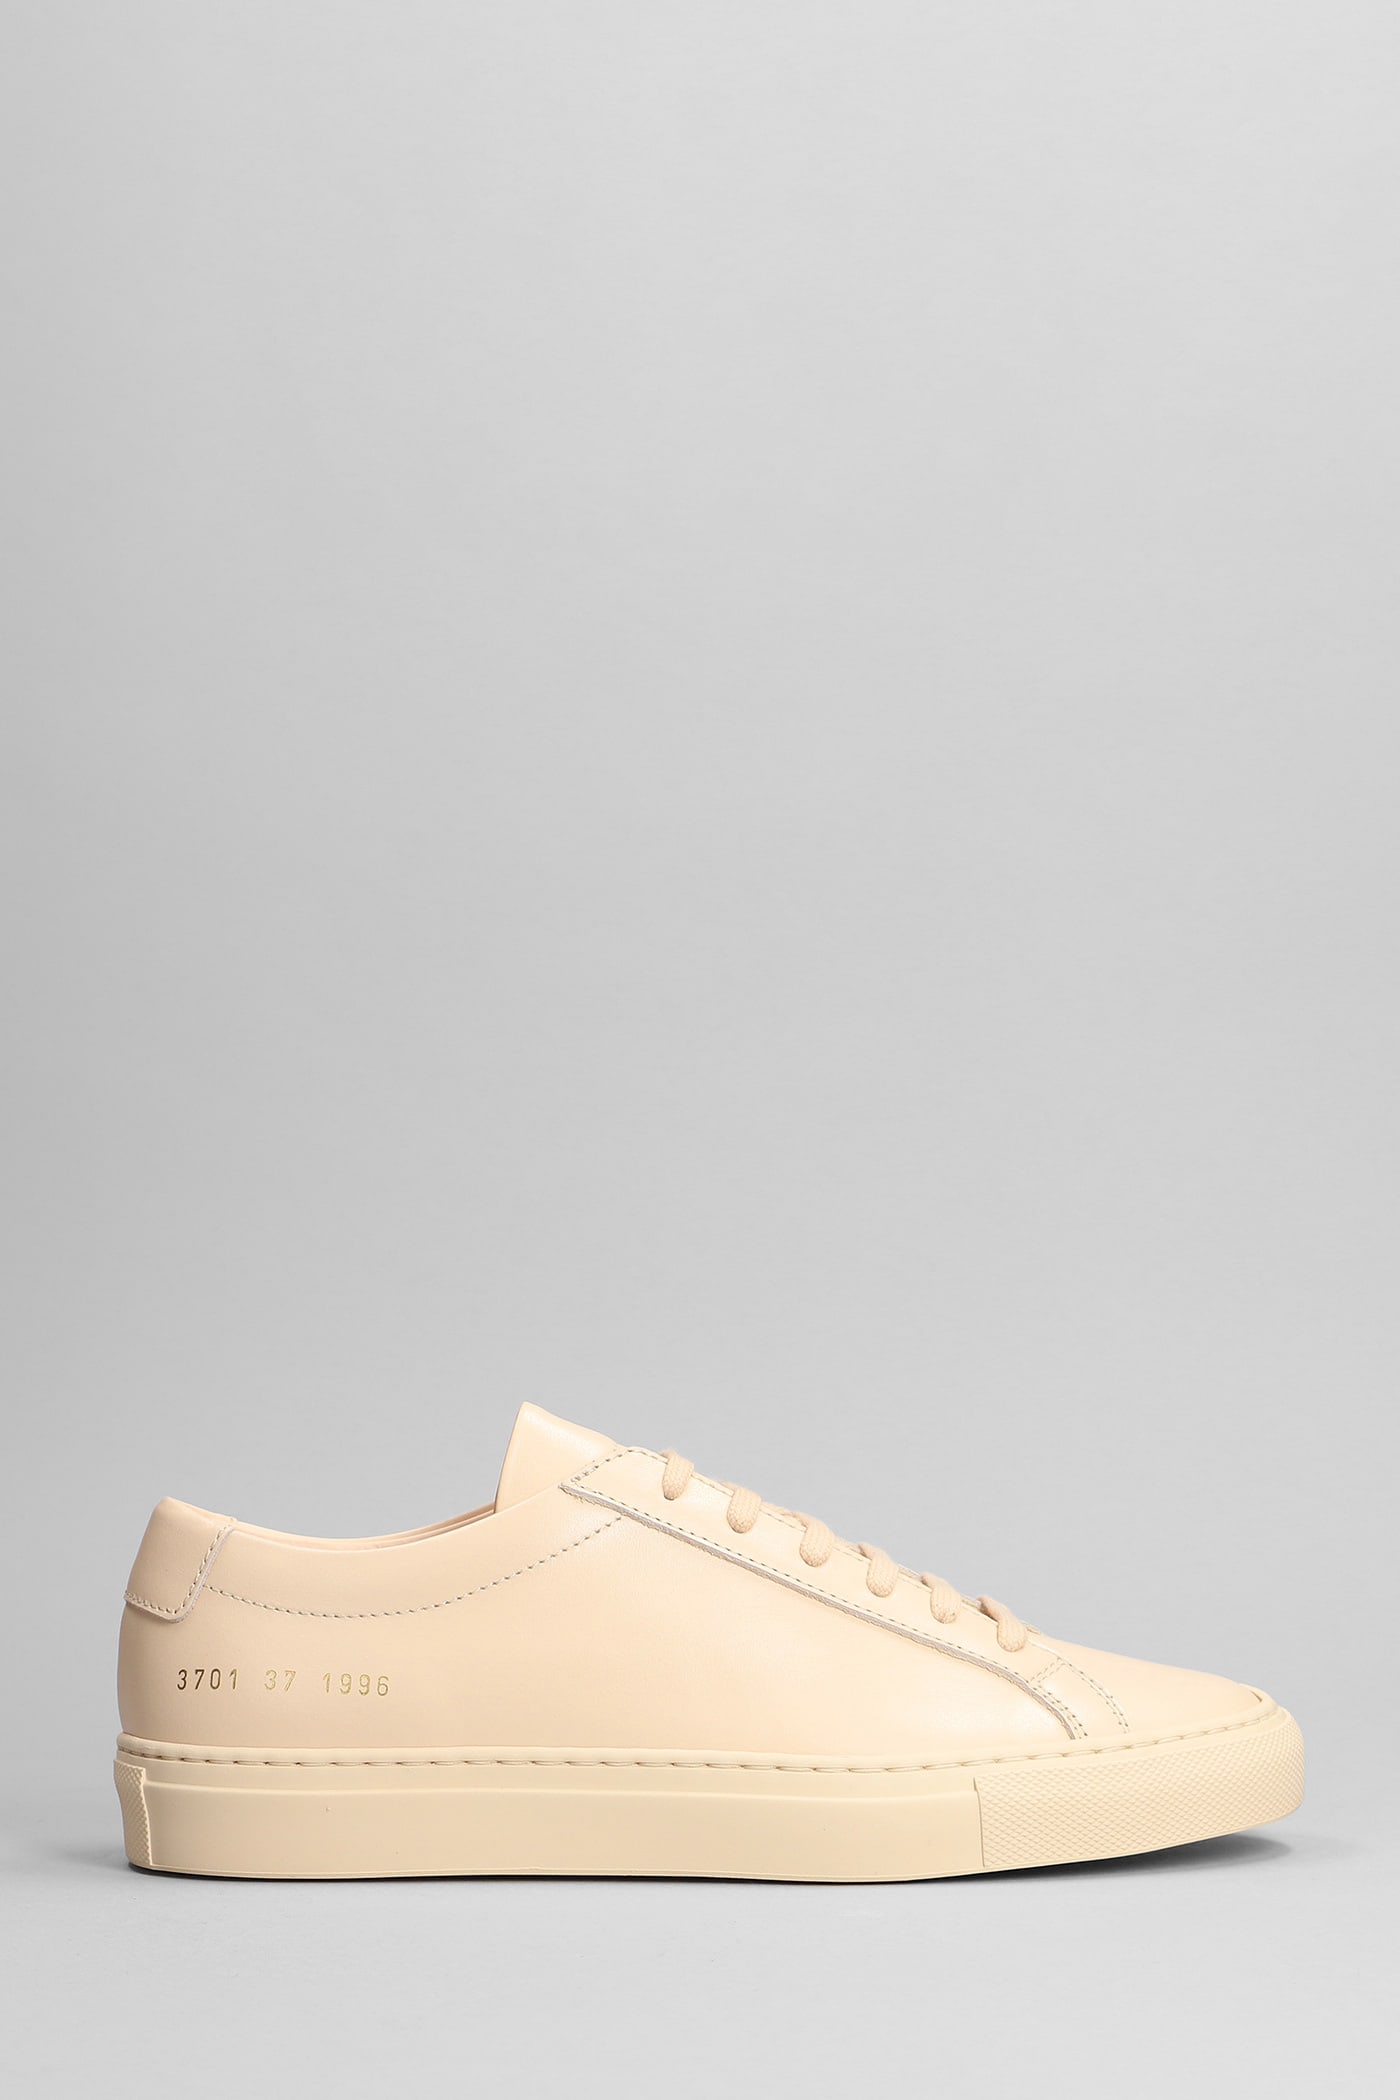 COMMON PROJECTS ORIGINALS ACHILLES SNEAKERS IN POWDER LEATHER